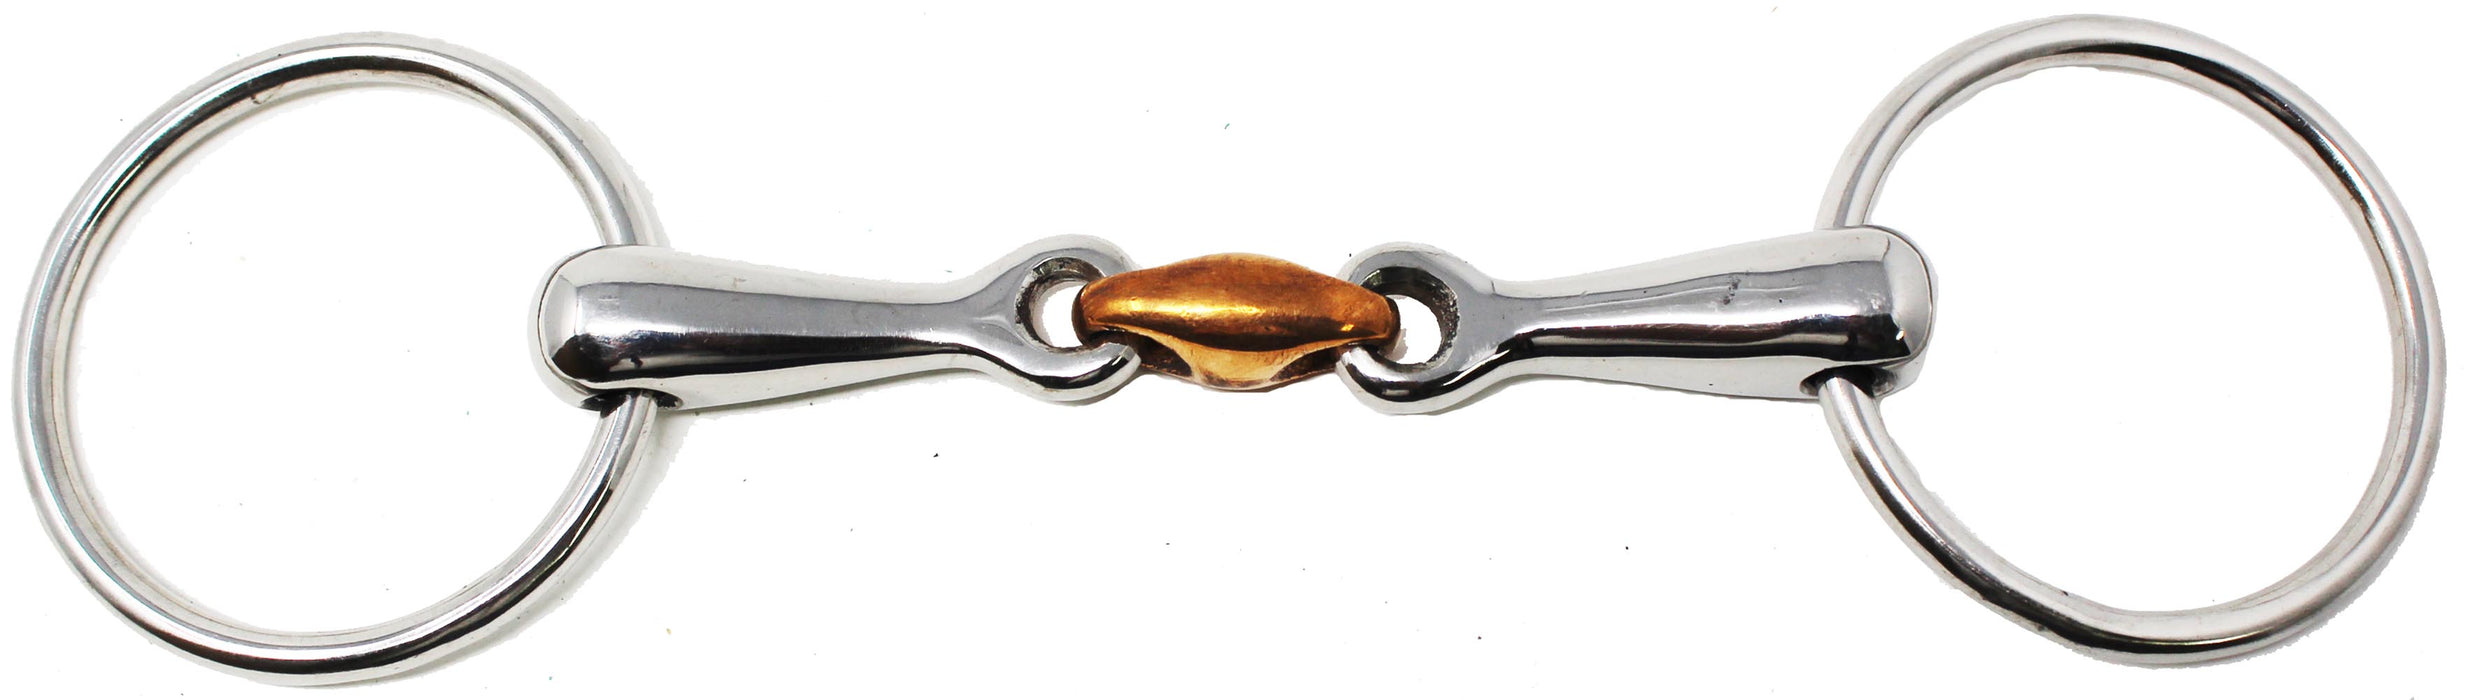 Stainless Steel Loose Ring Copper Dog Bone Snaffle Horse Bit 5" Mouth 35518B